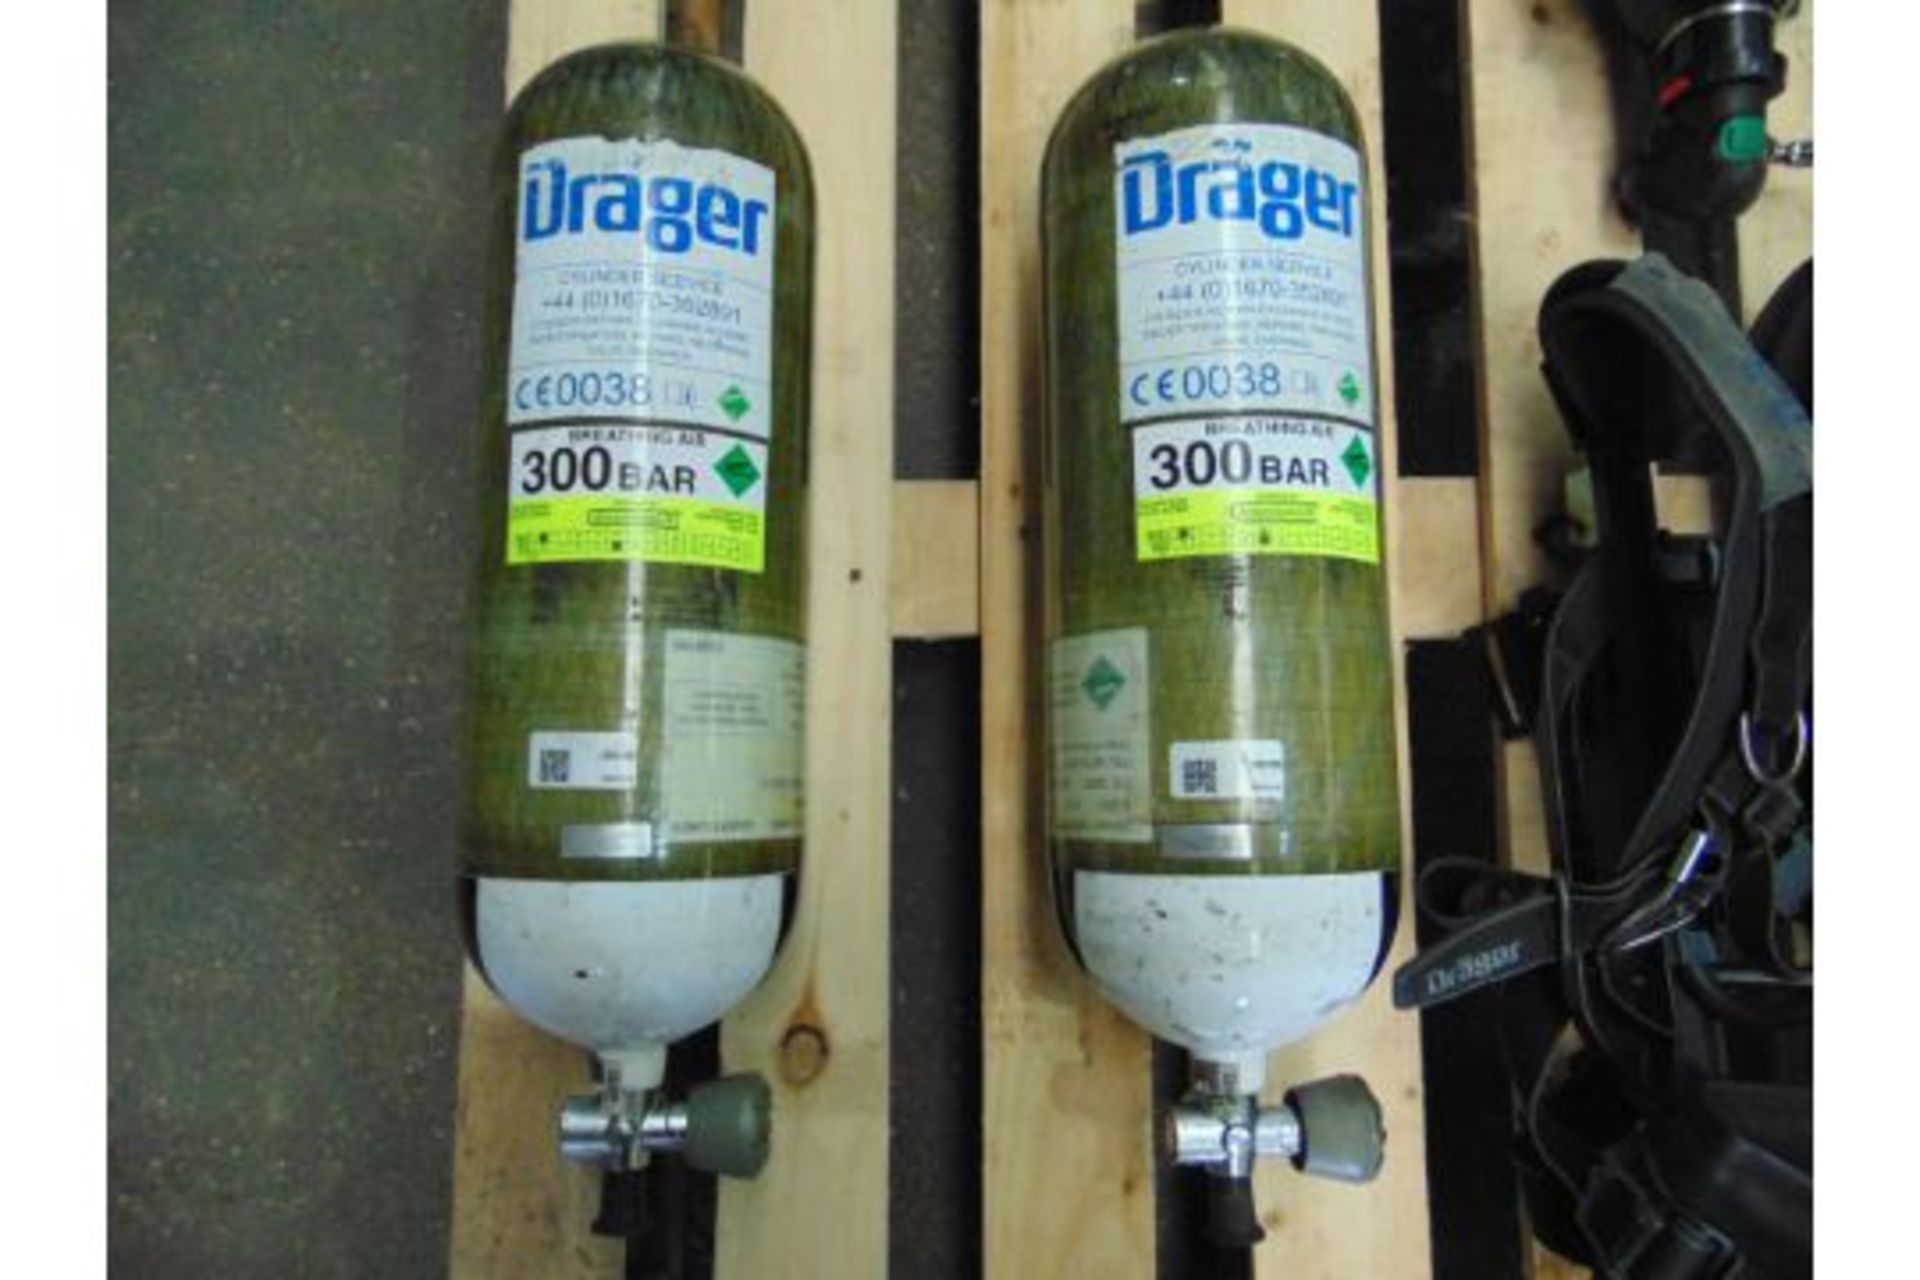 Drager PSS 7000 Self Contained Breathing Apparatus w/ 2 x Drager 300 Bar Air Cylinders - Bild 3 aus 18